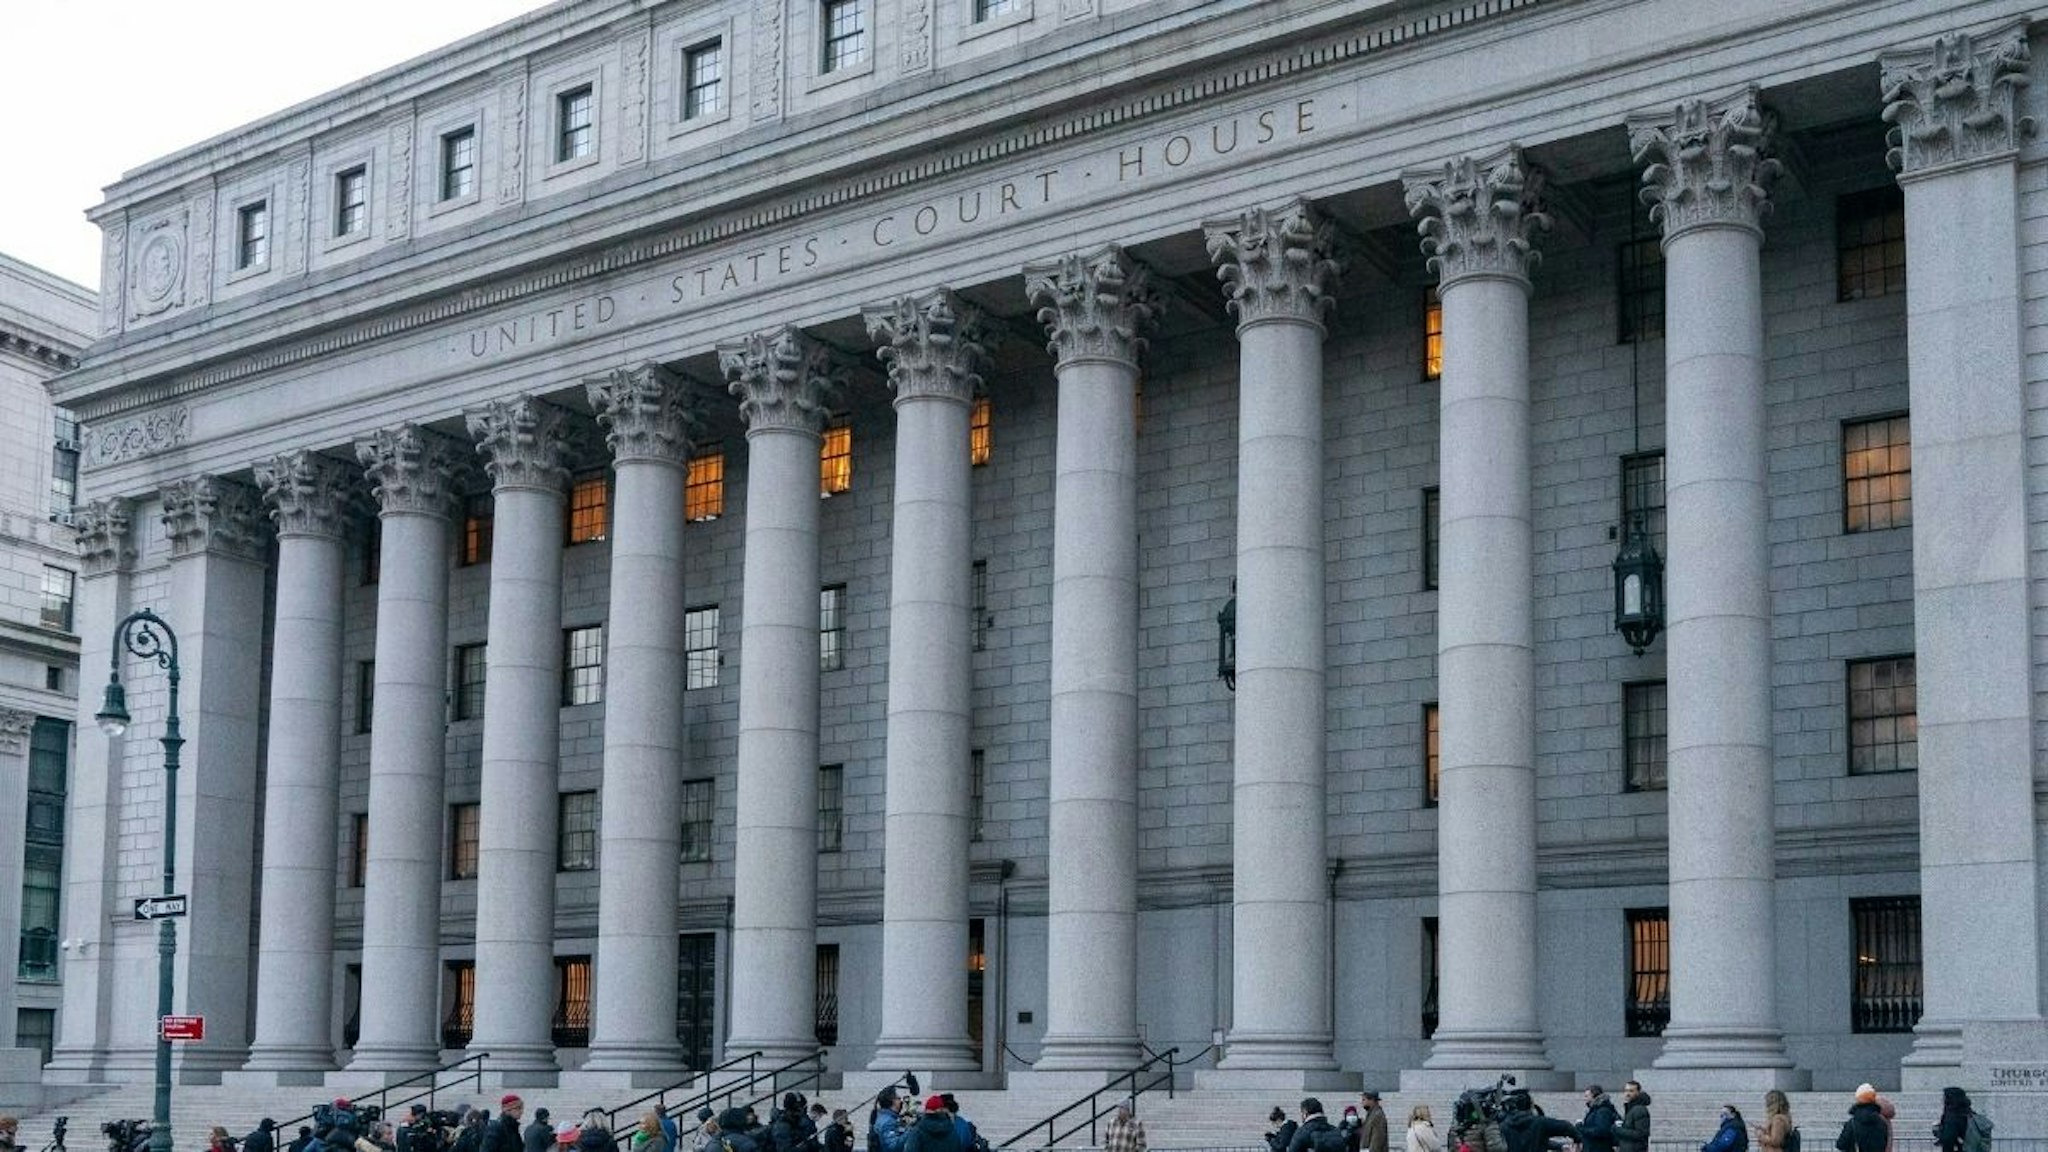 The Thurgood Marshall United States Courthouse where the trial of Ghislaine Maxwell is being held on November 29, 2021 in New York City. Maxwell, the daughter of late media mogul Robert Maxwell is on trial for sex trafficking.